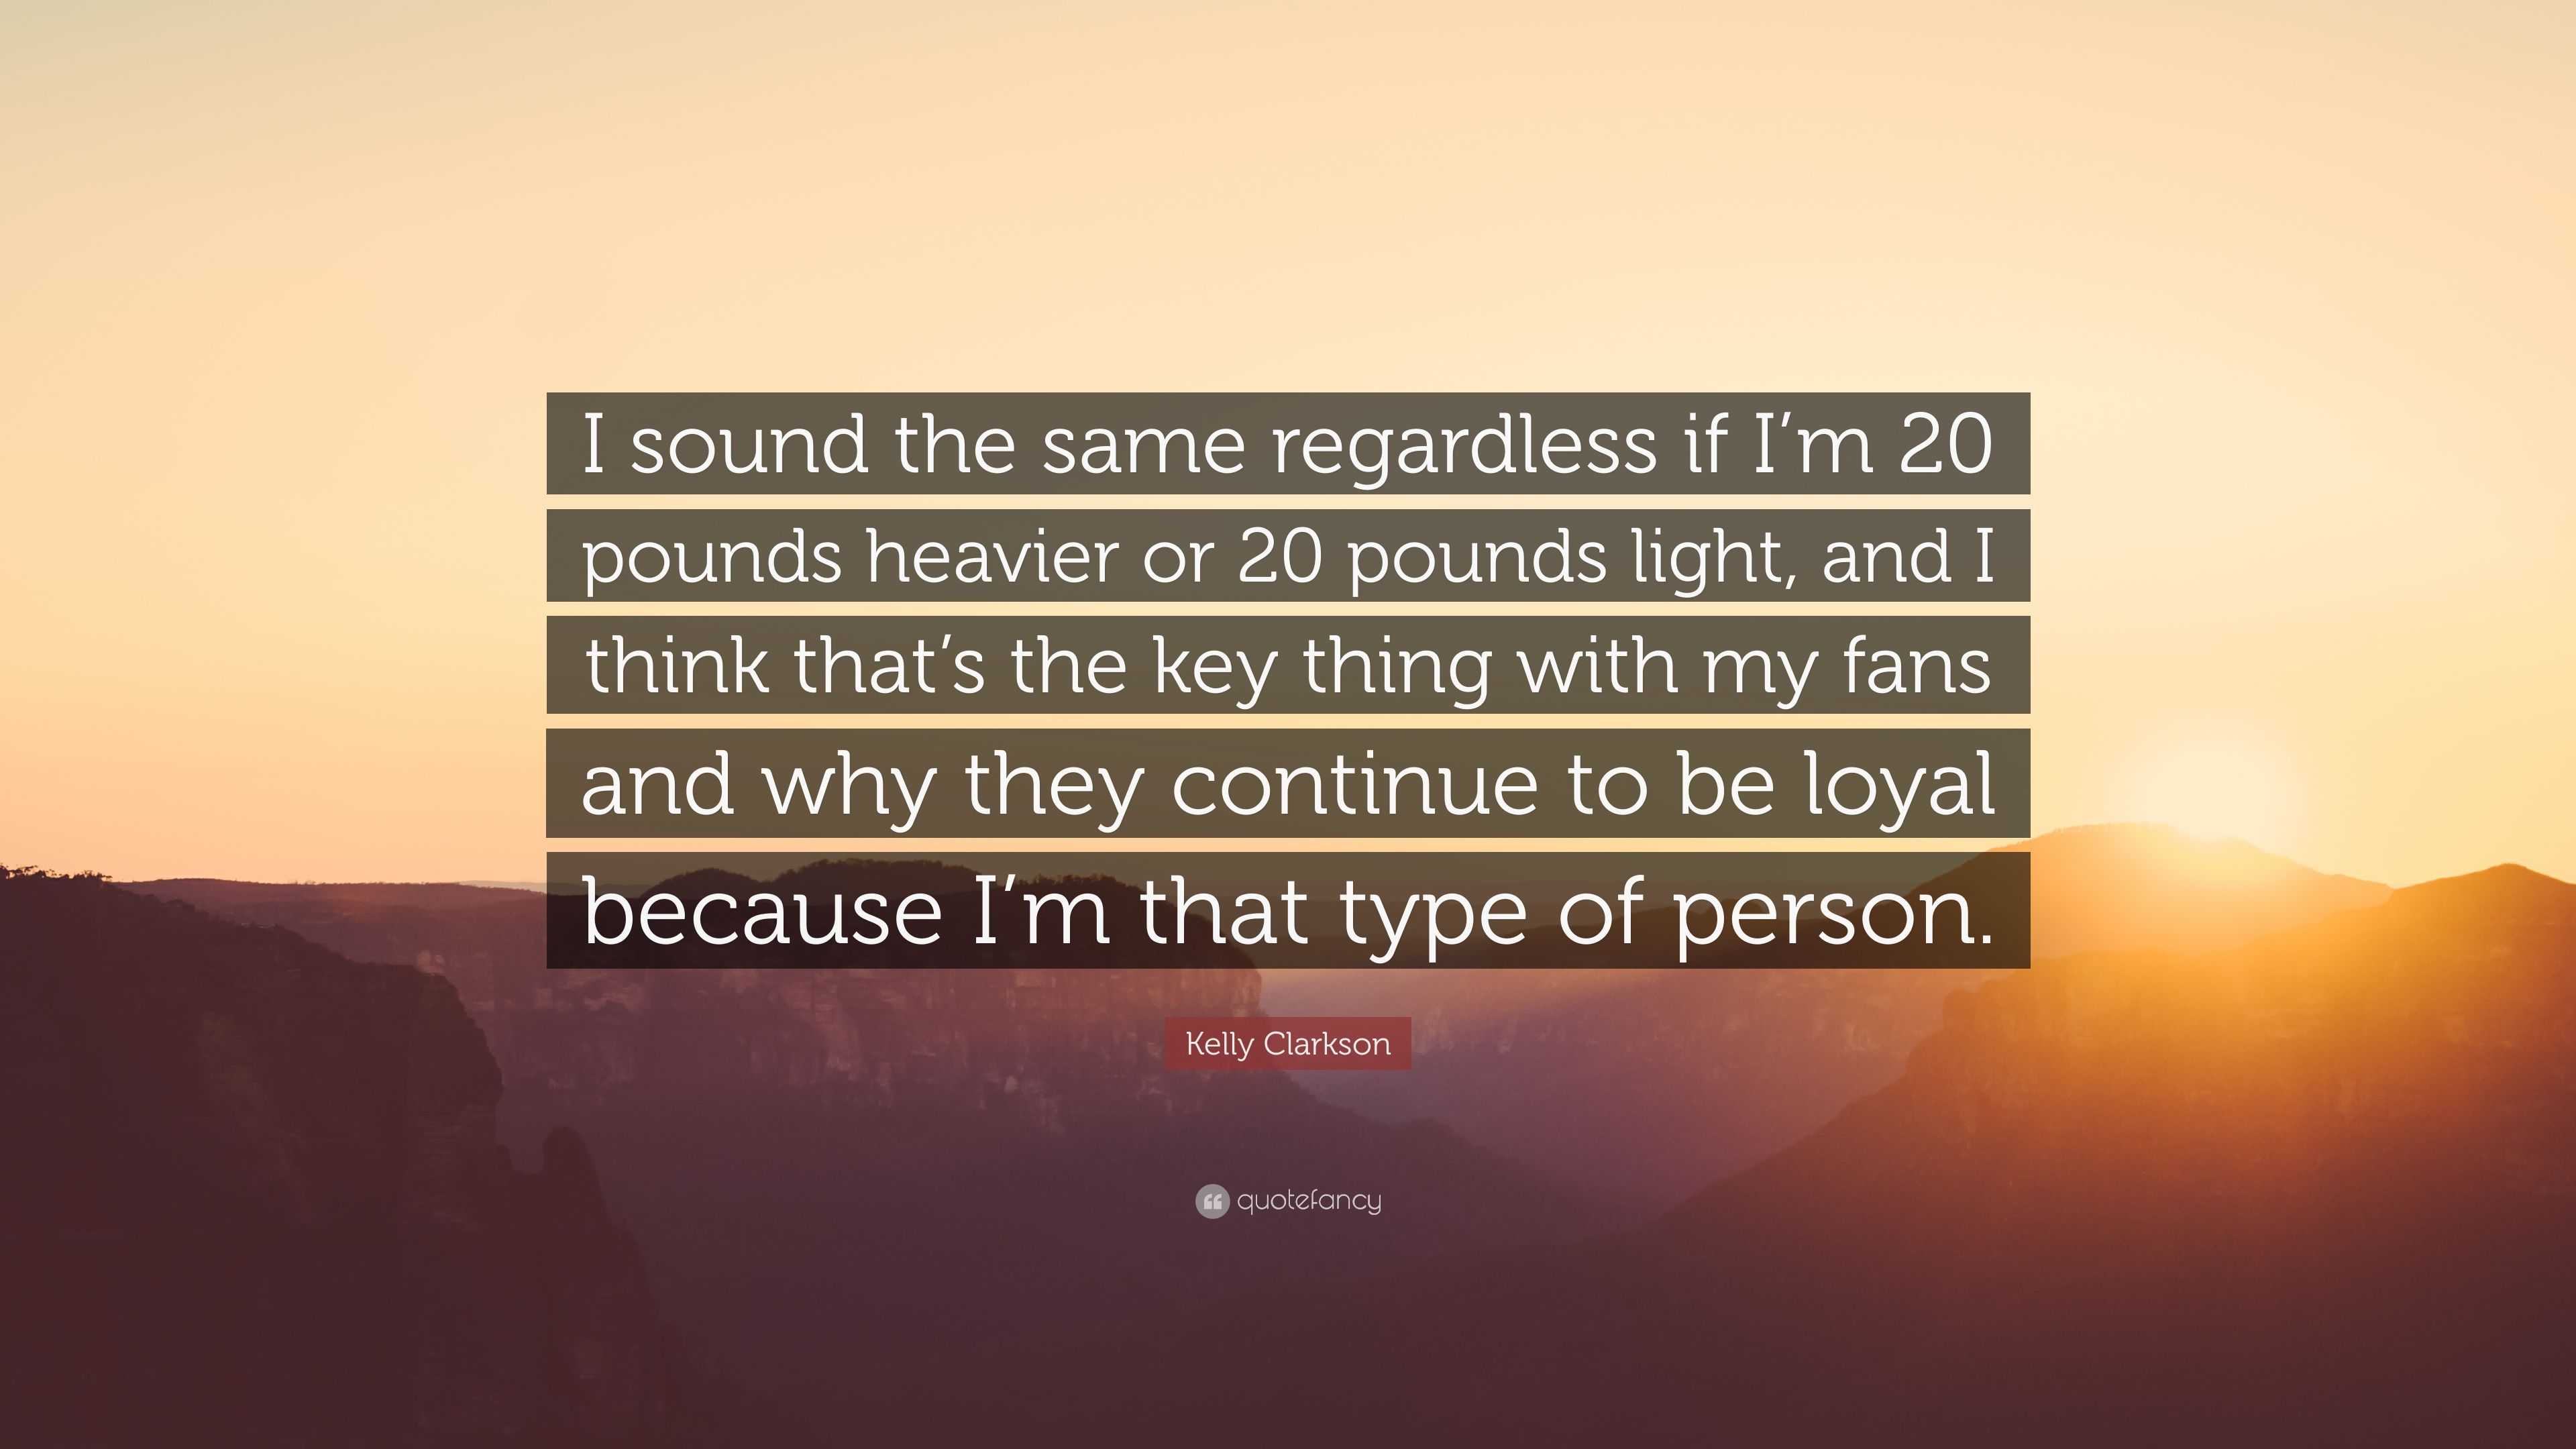 https://quotefancy.com/media/wallpaper/3840x2160/6262415-Kelly-Clarkson-Quote-I-sound-the-same-regardless-if-I-m-20-pounds.jpg